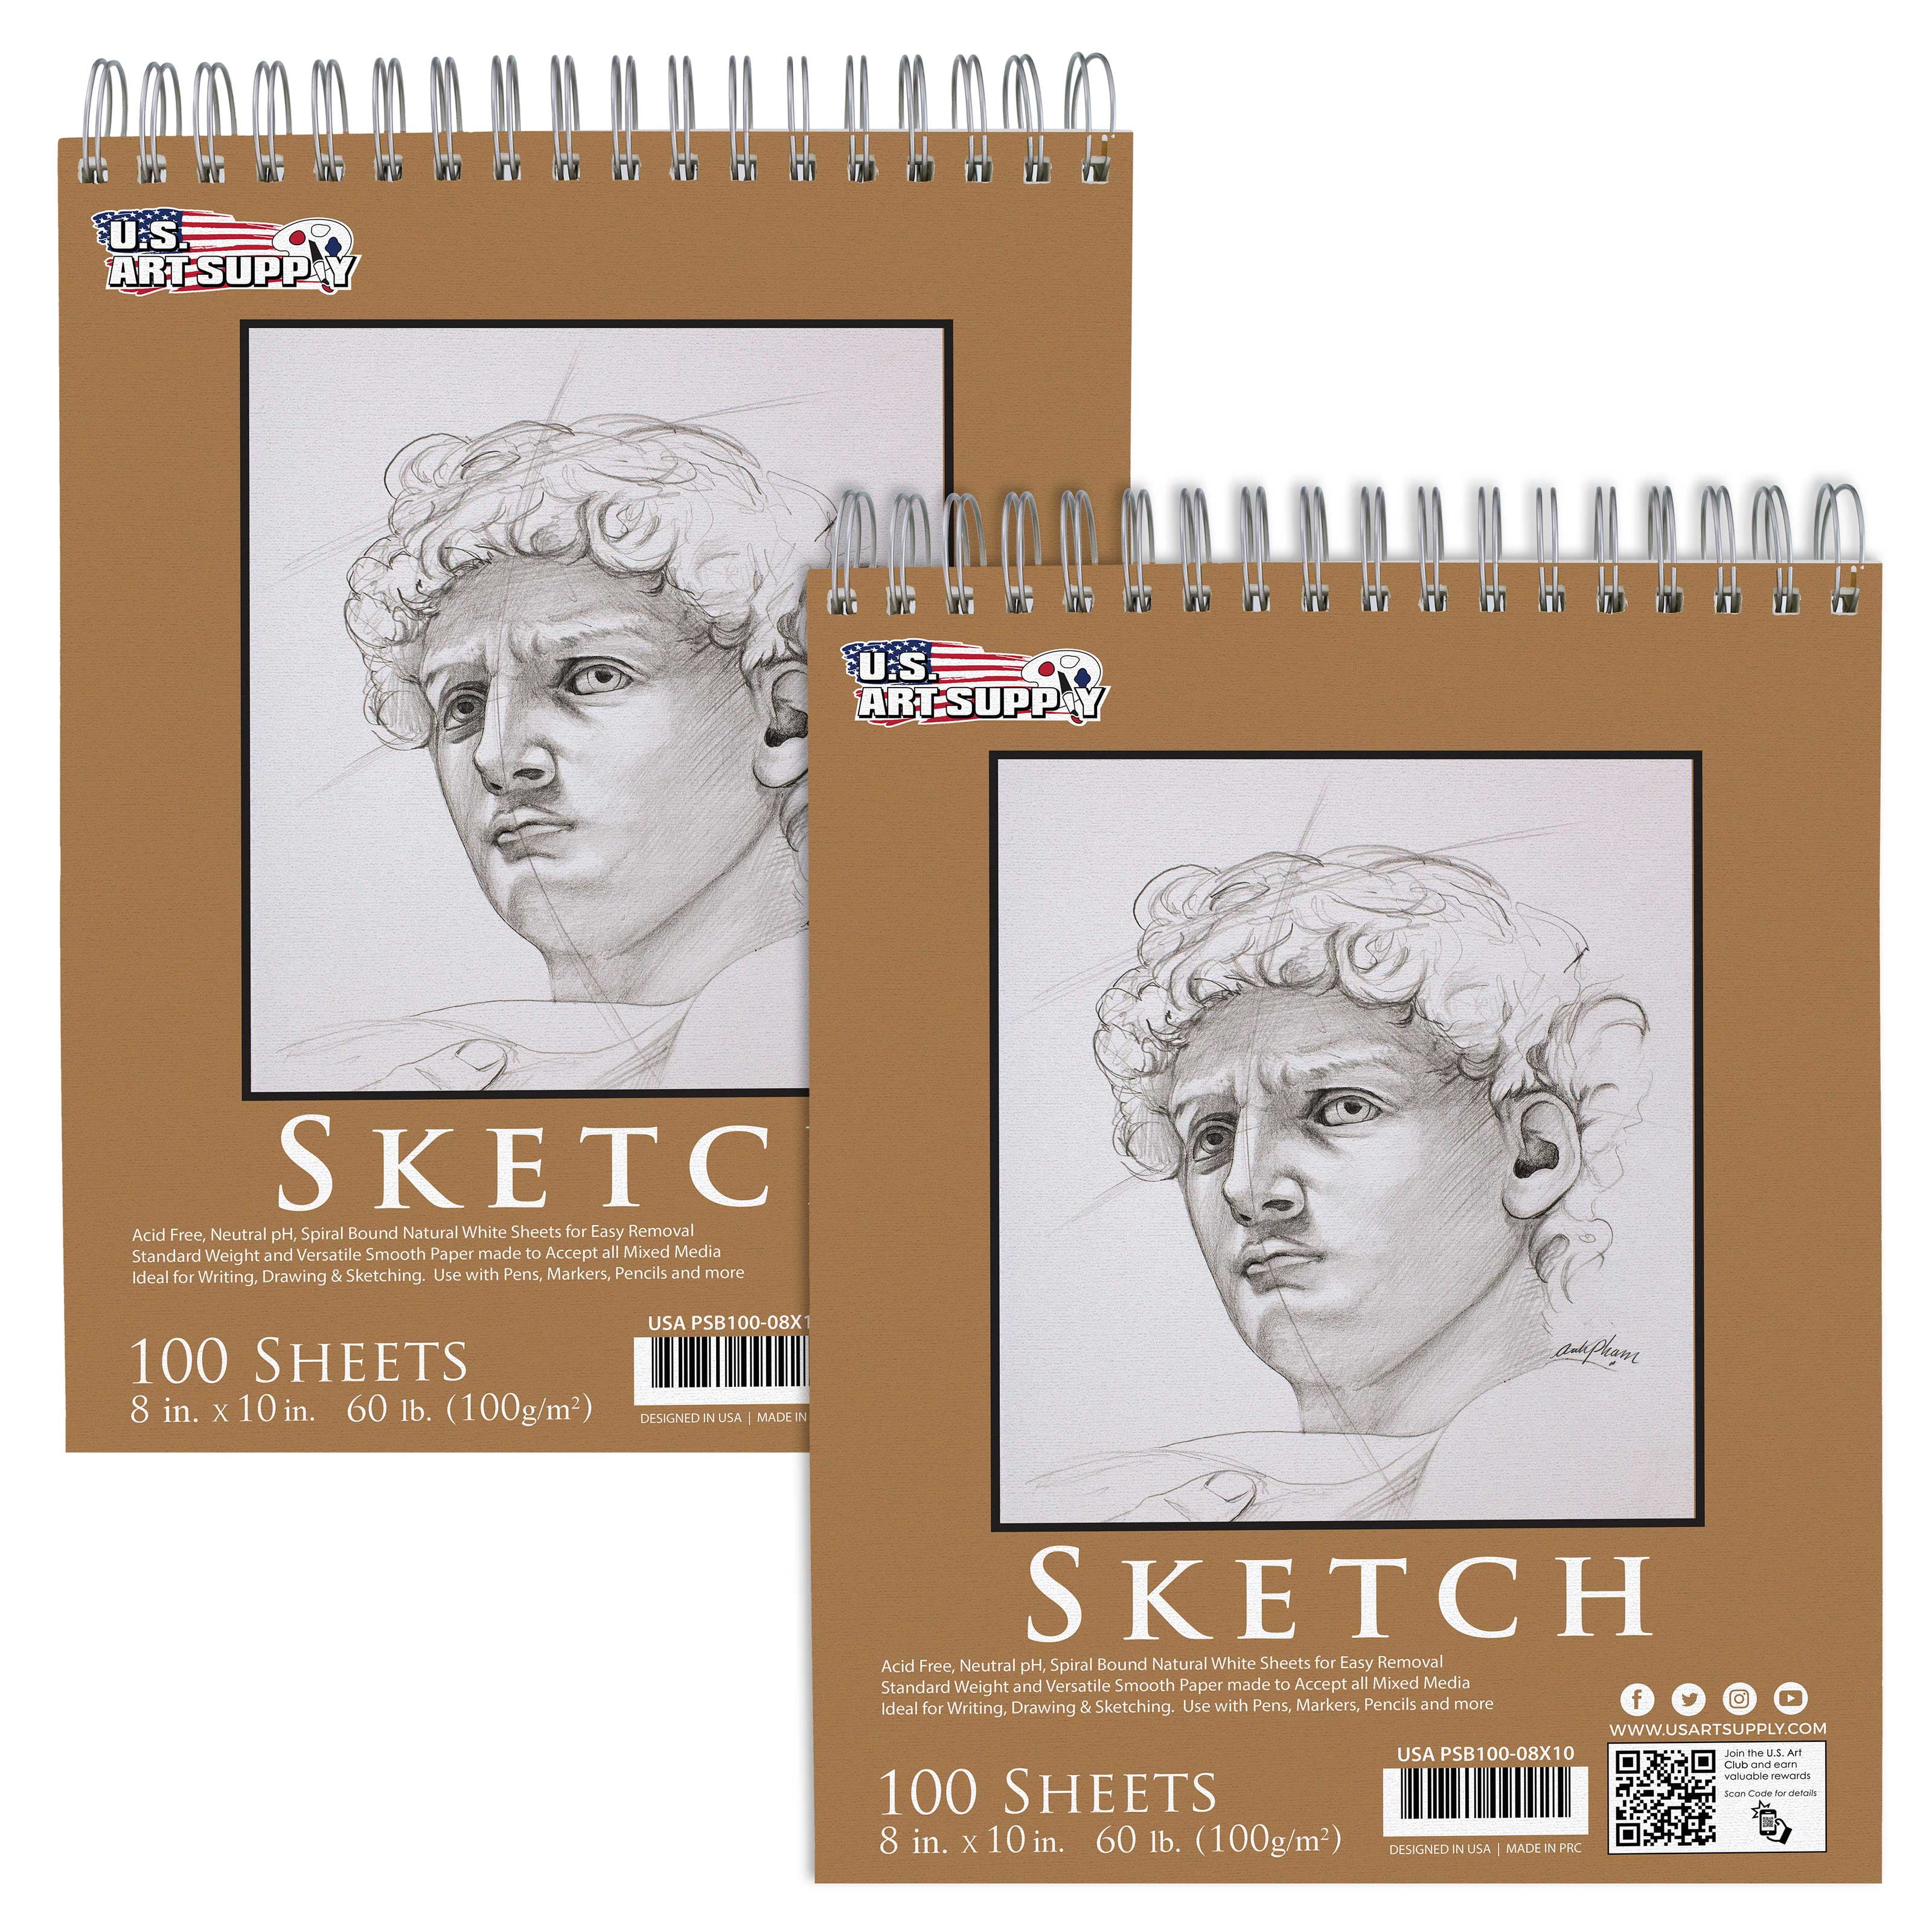 Bachmore Sketchpad 9X12 Inch (68lb/100g), 100 Sheets of TOP Spiral Bound  Sketch Book for Artist Pro & Amateurs | Marker Art, Colored Pencil,  Charcoal